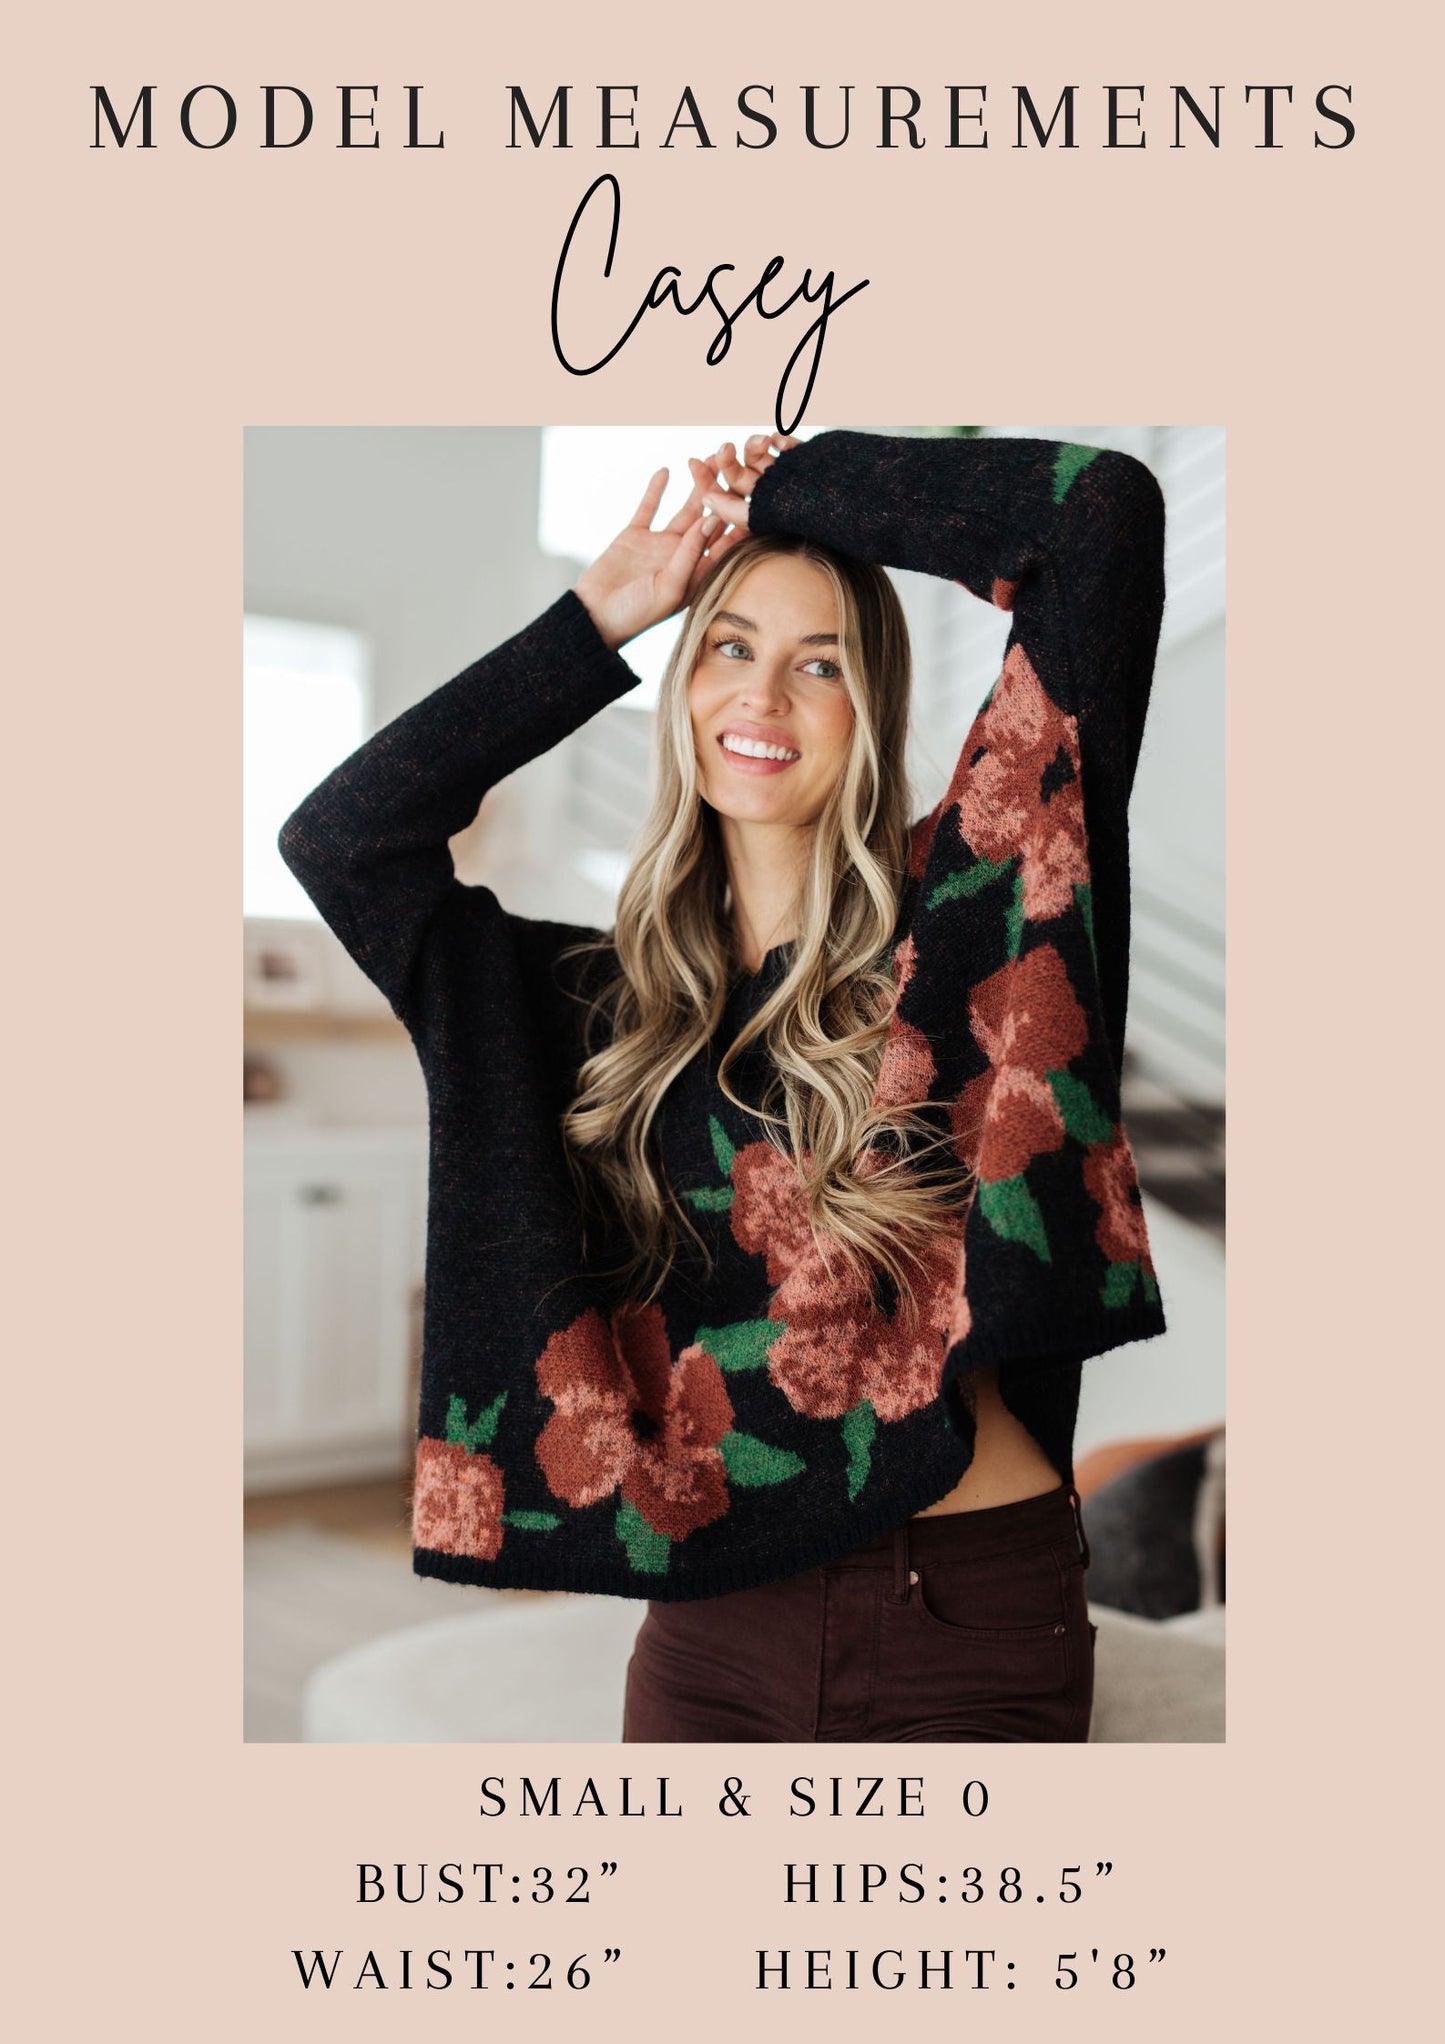 This Calming Down Loose Knit Top offers lightweight comfort. Its sheer layer and relaxed fit will keep you relaxed and comfy all day long! Perfect for when you need to take it easy. S-3X